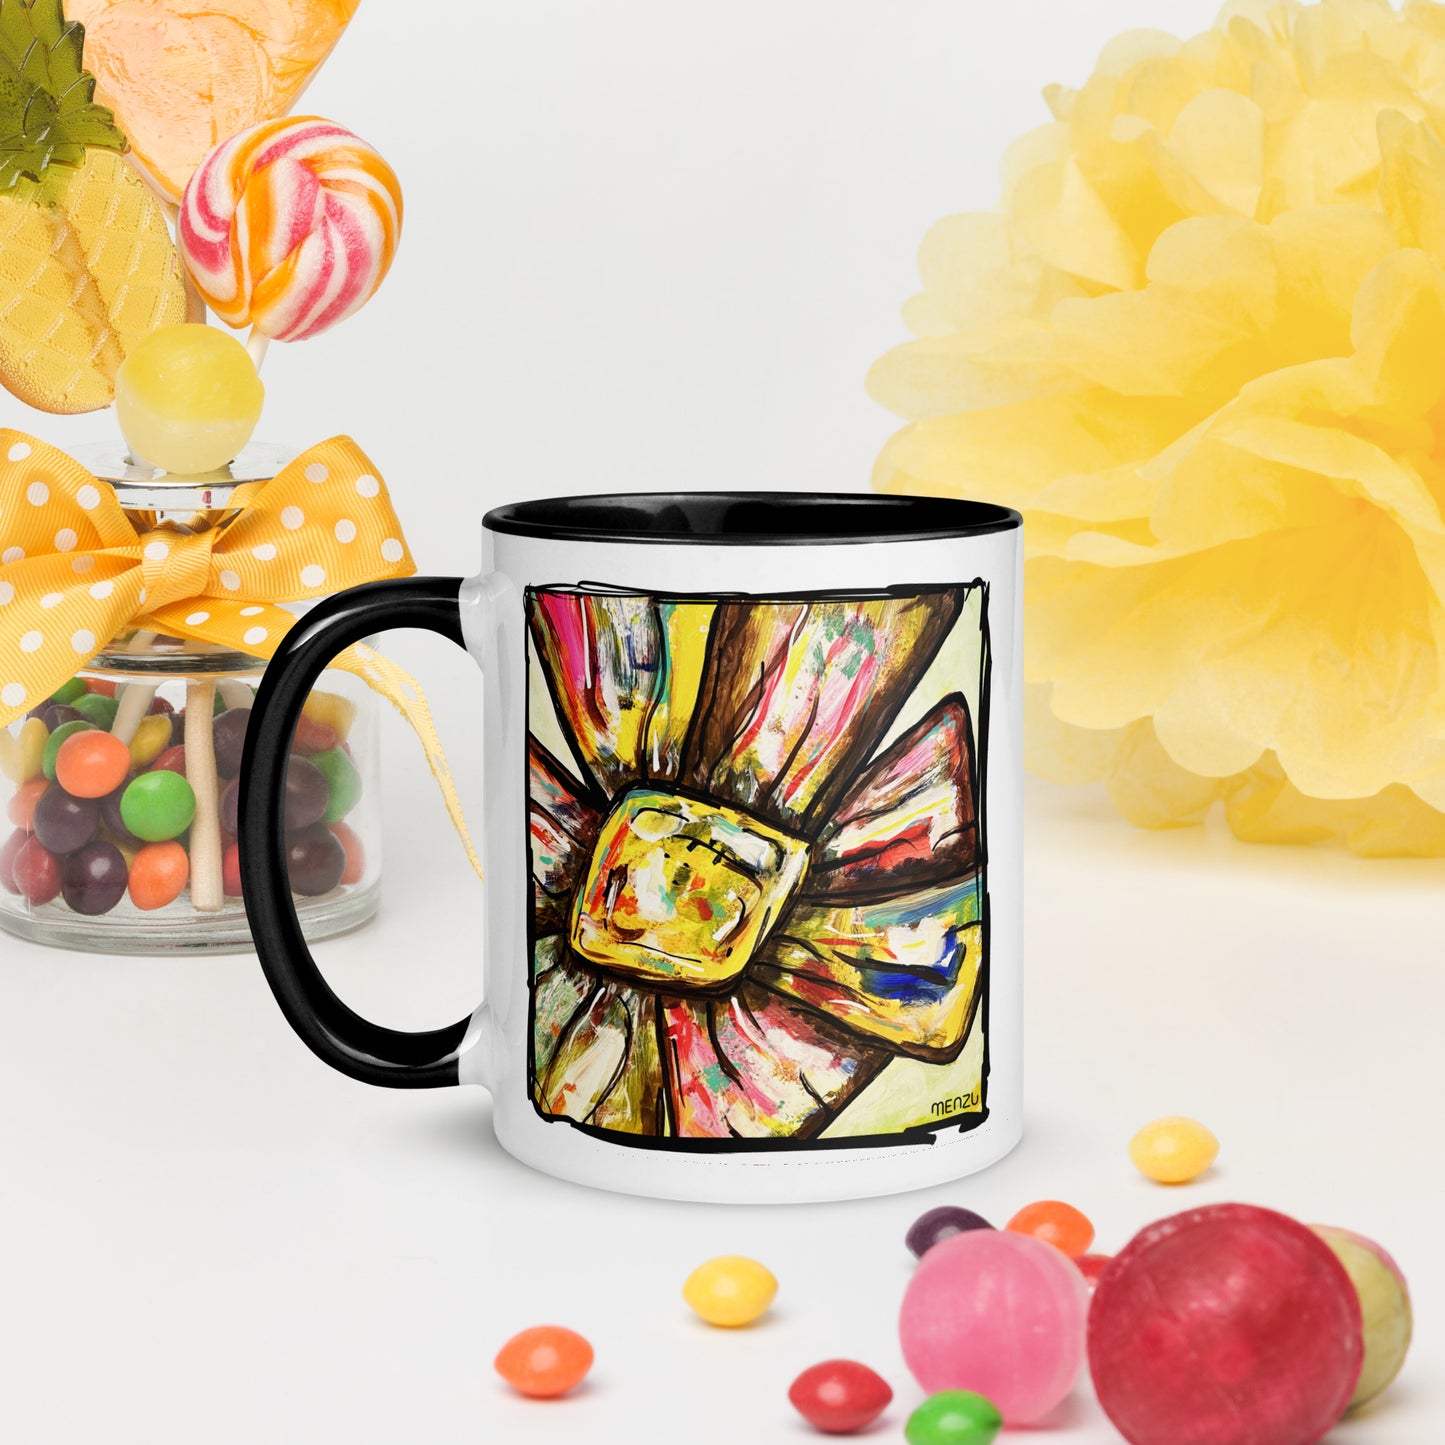 They are watching us - Flower N.4 - Mug